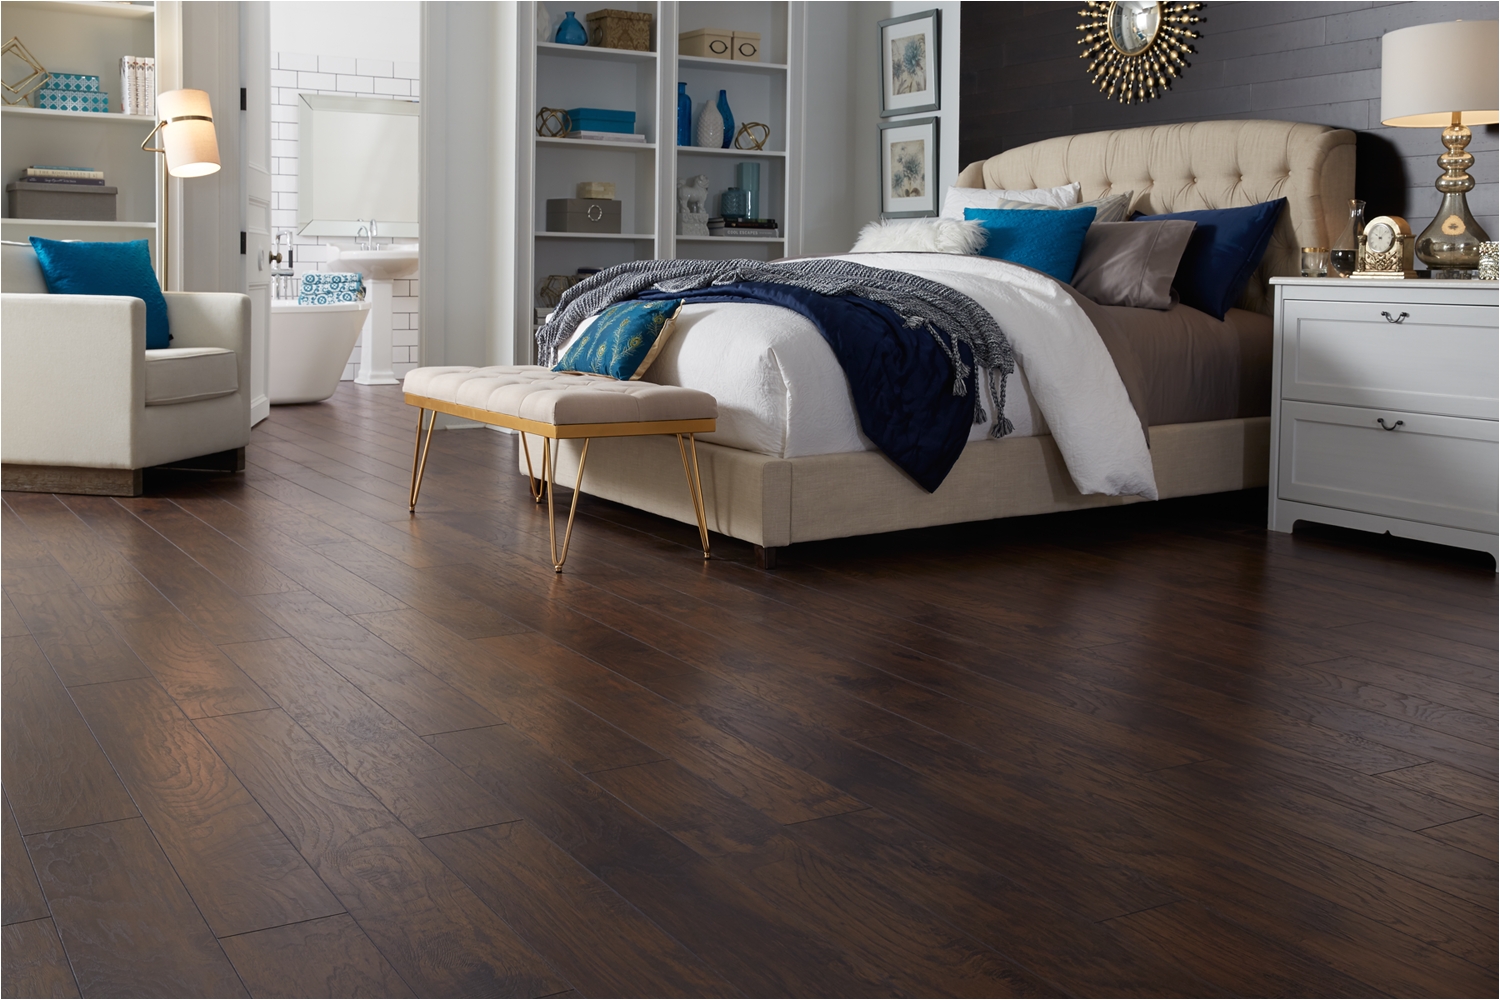 Laminate Flooring for Mobile Homes Commonwealth Hickory Dream Home Ultra X2o Laminate Floors